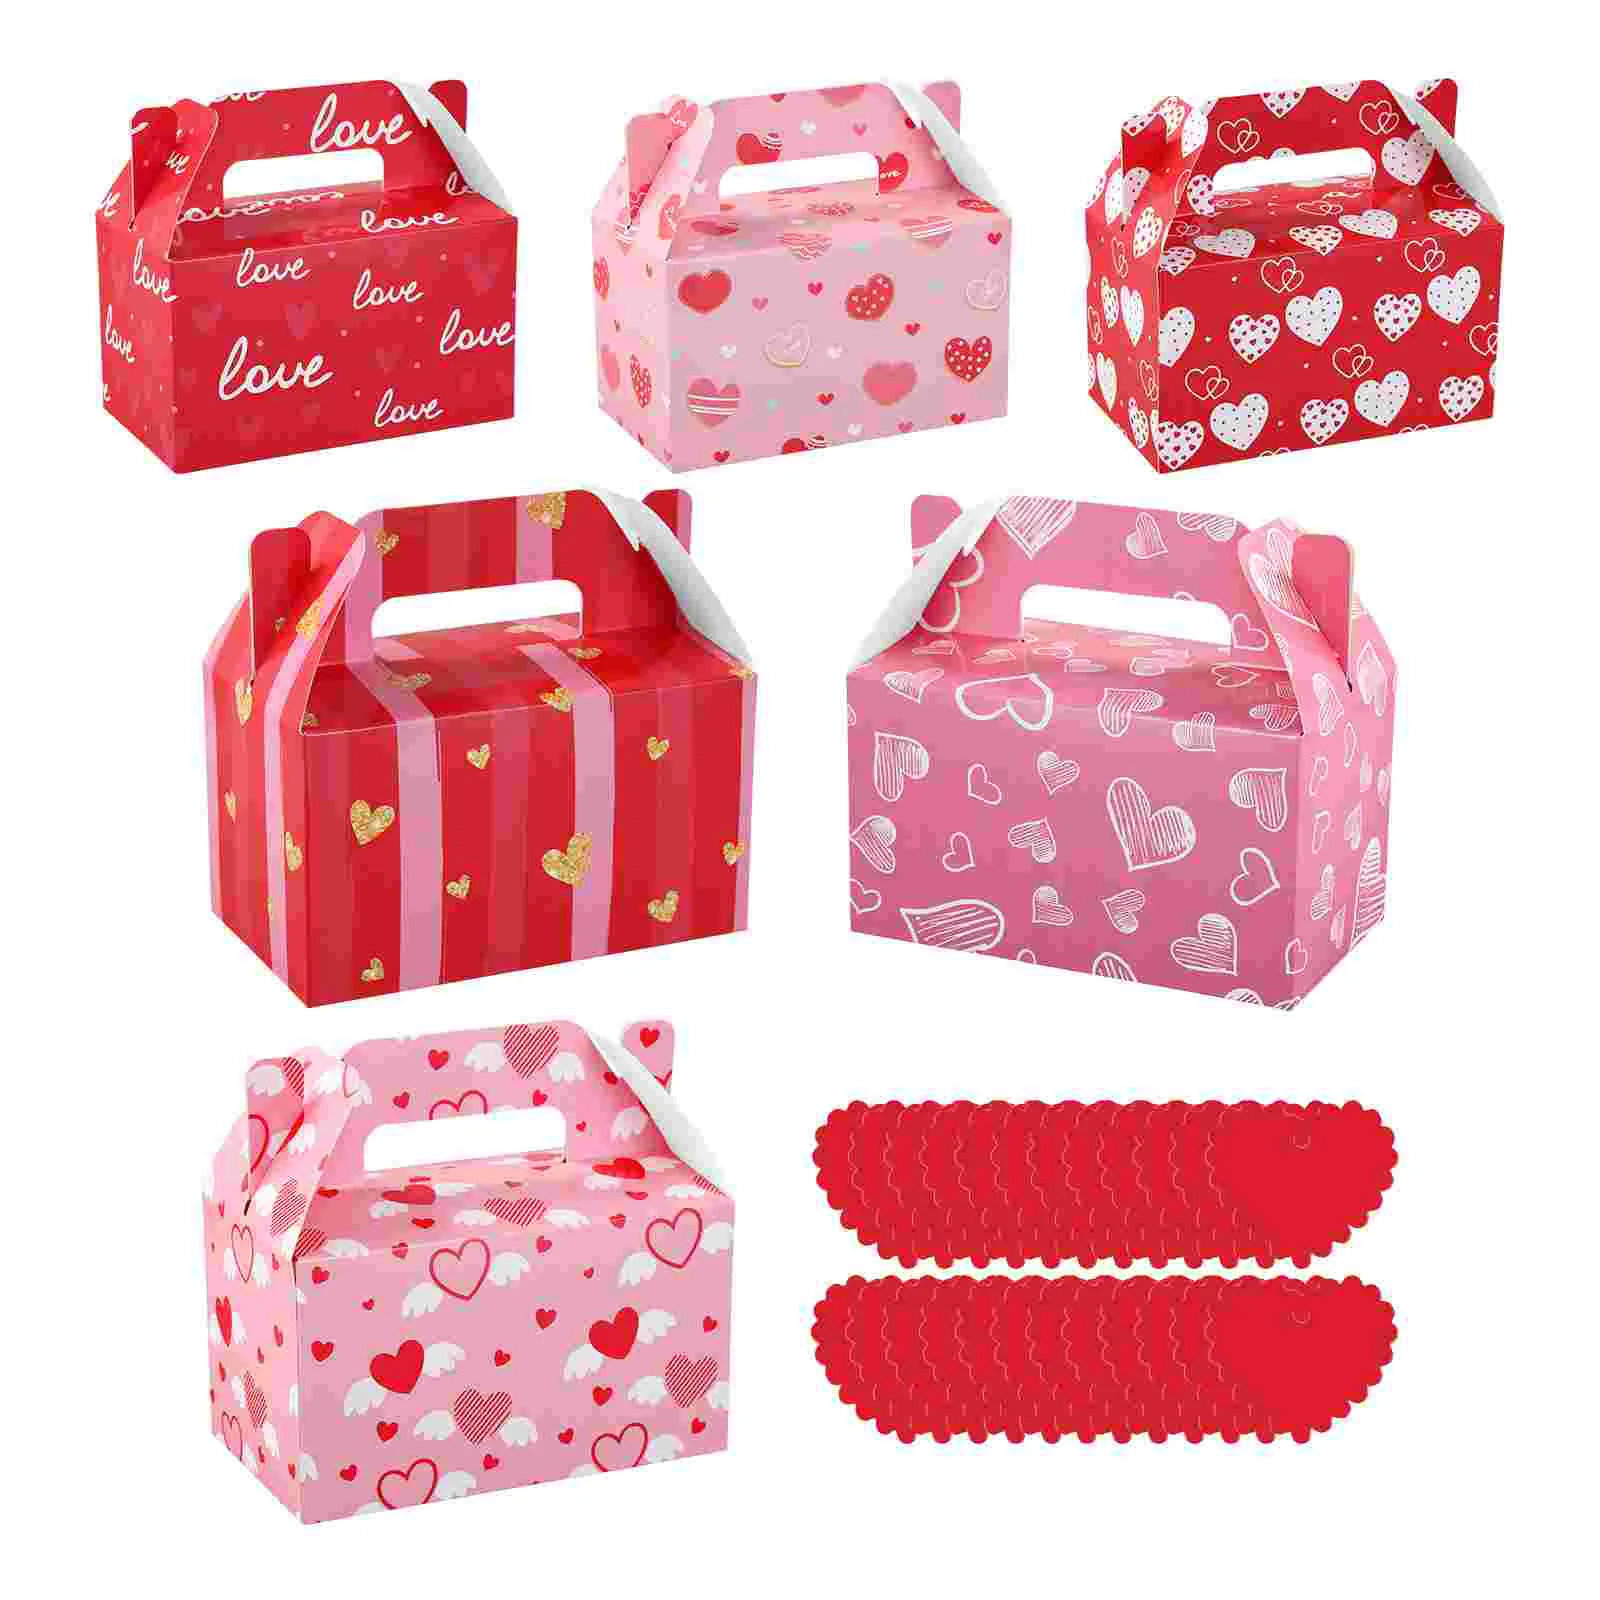 

24pcs Treat Boxes with Handles Donut Goodie Bags Cookie Bags for Gift Giving Goodie Boxes Party Favors Boxes